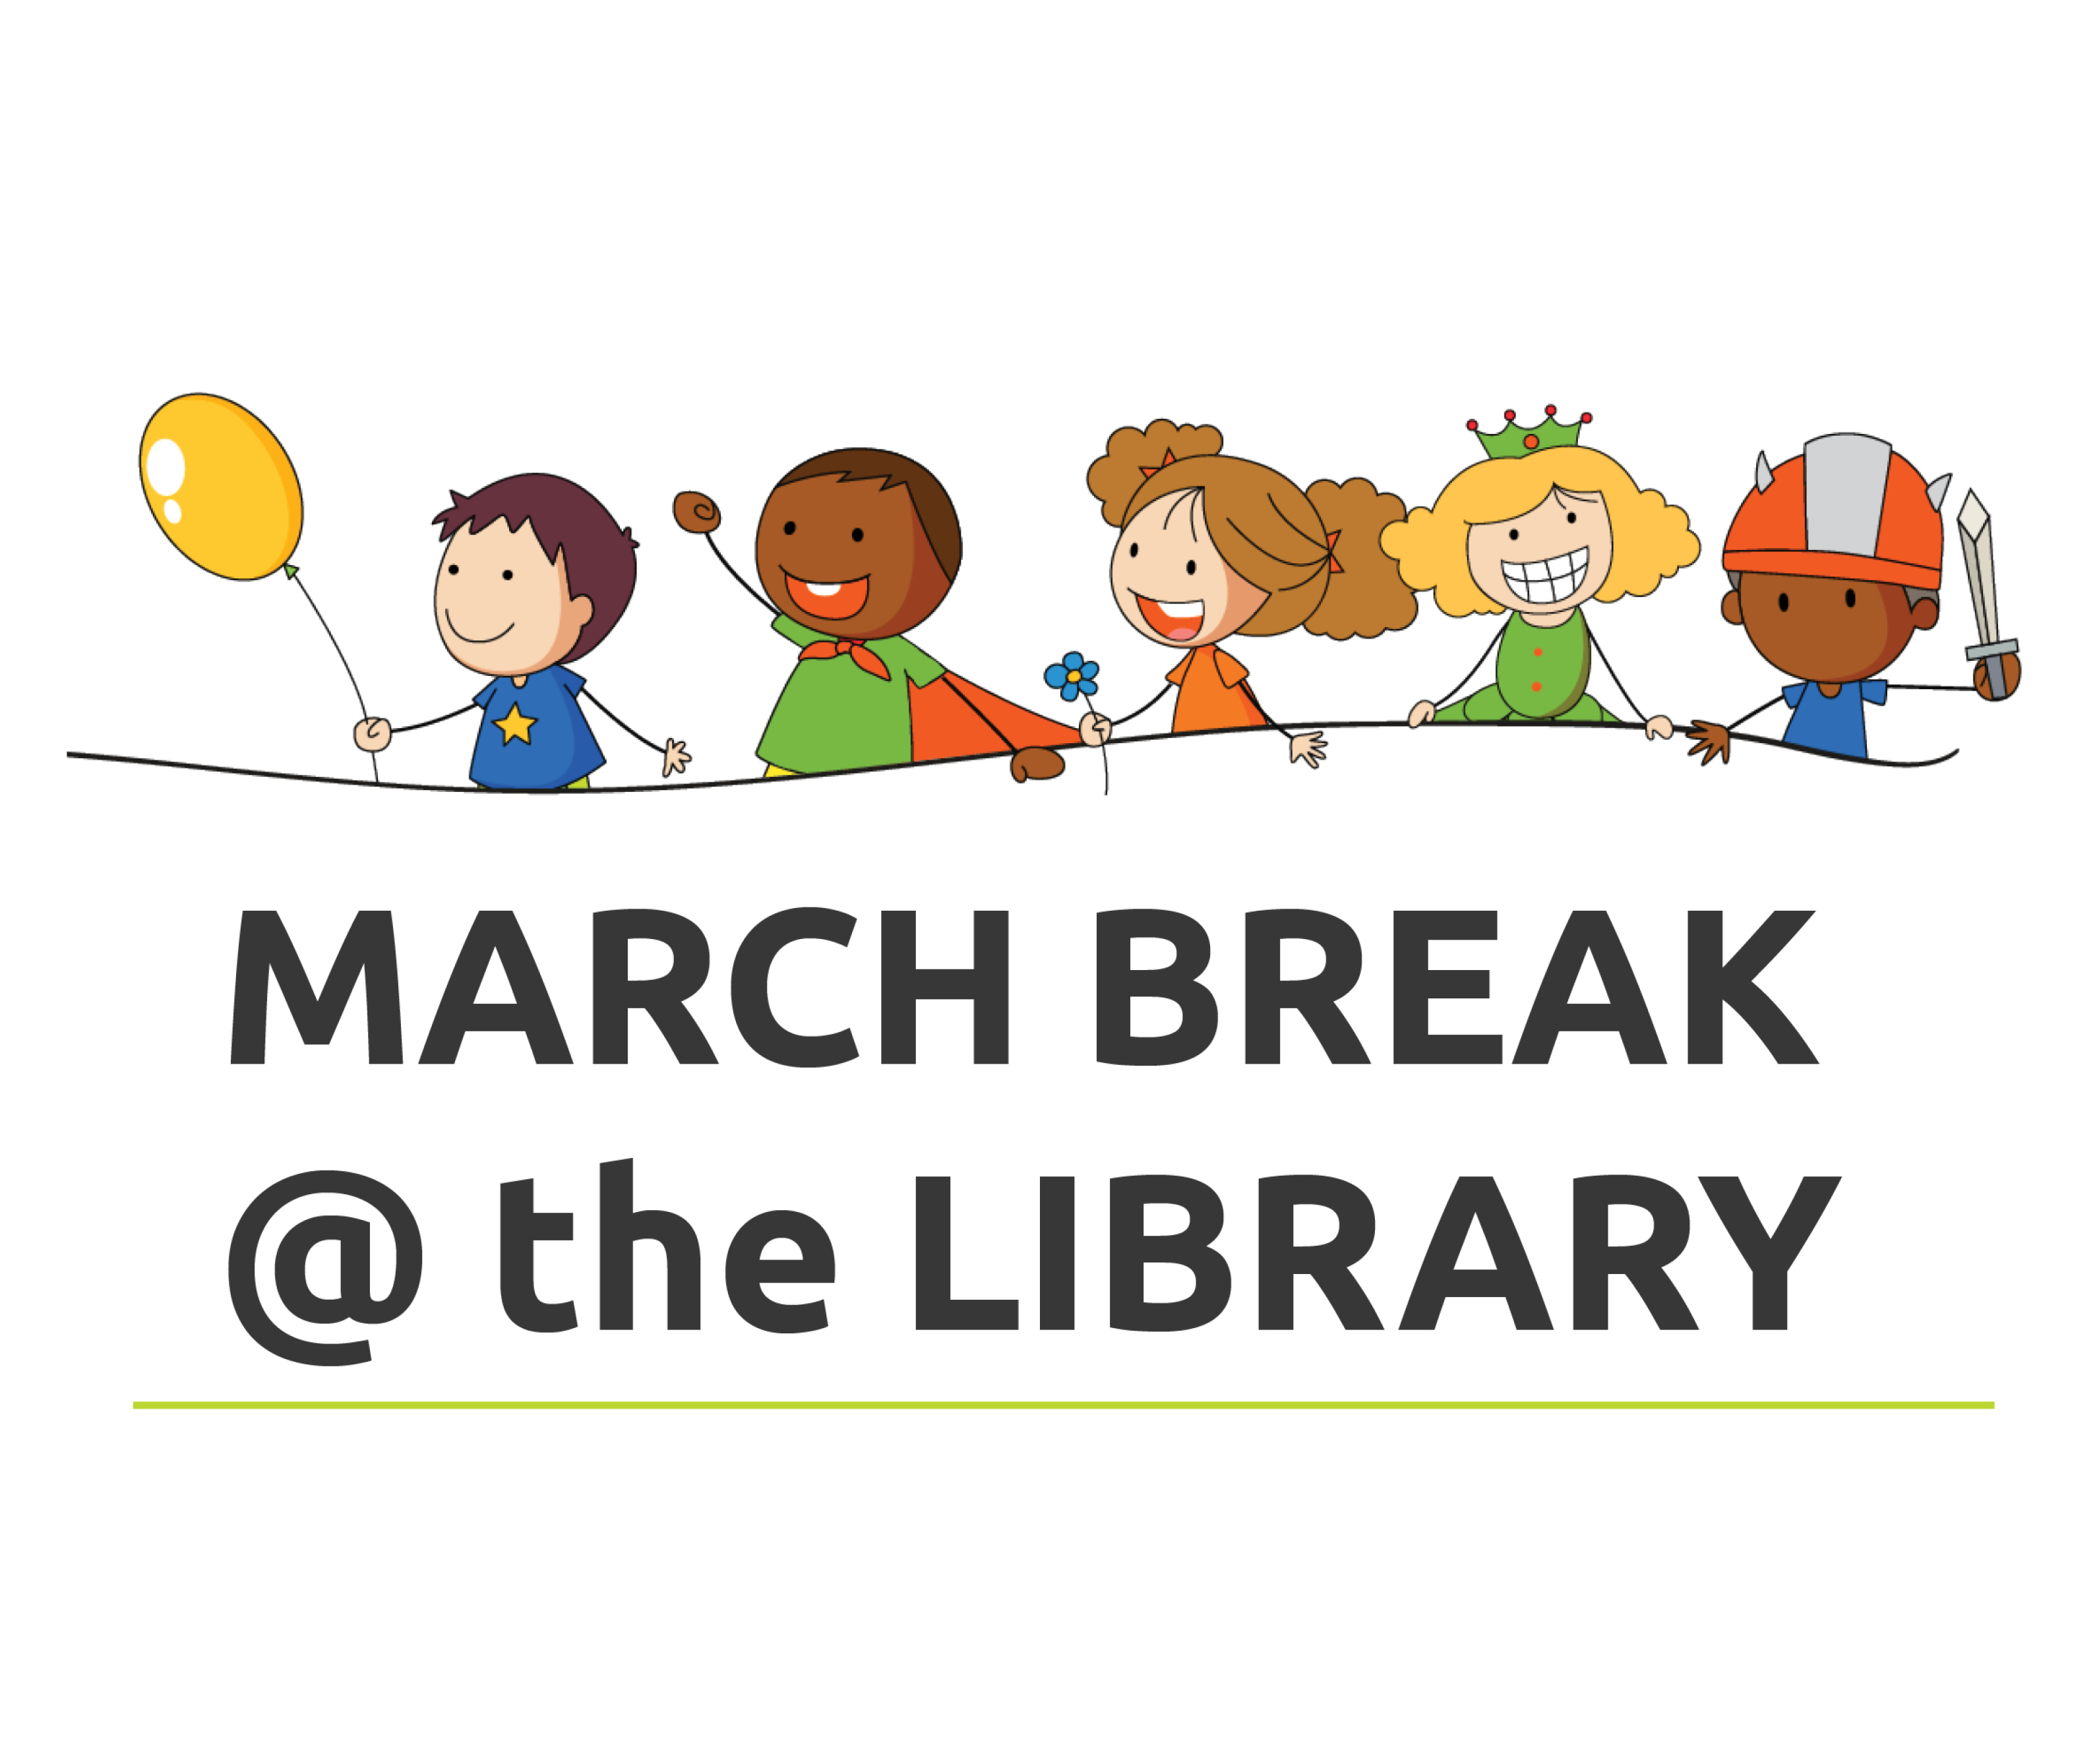 Illustration of 5 kids having fun with text promoting March Break at the Huron County Library